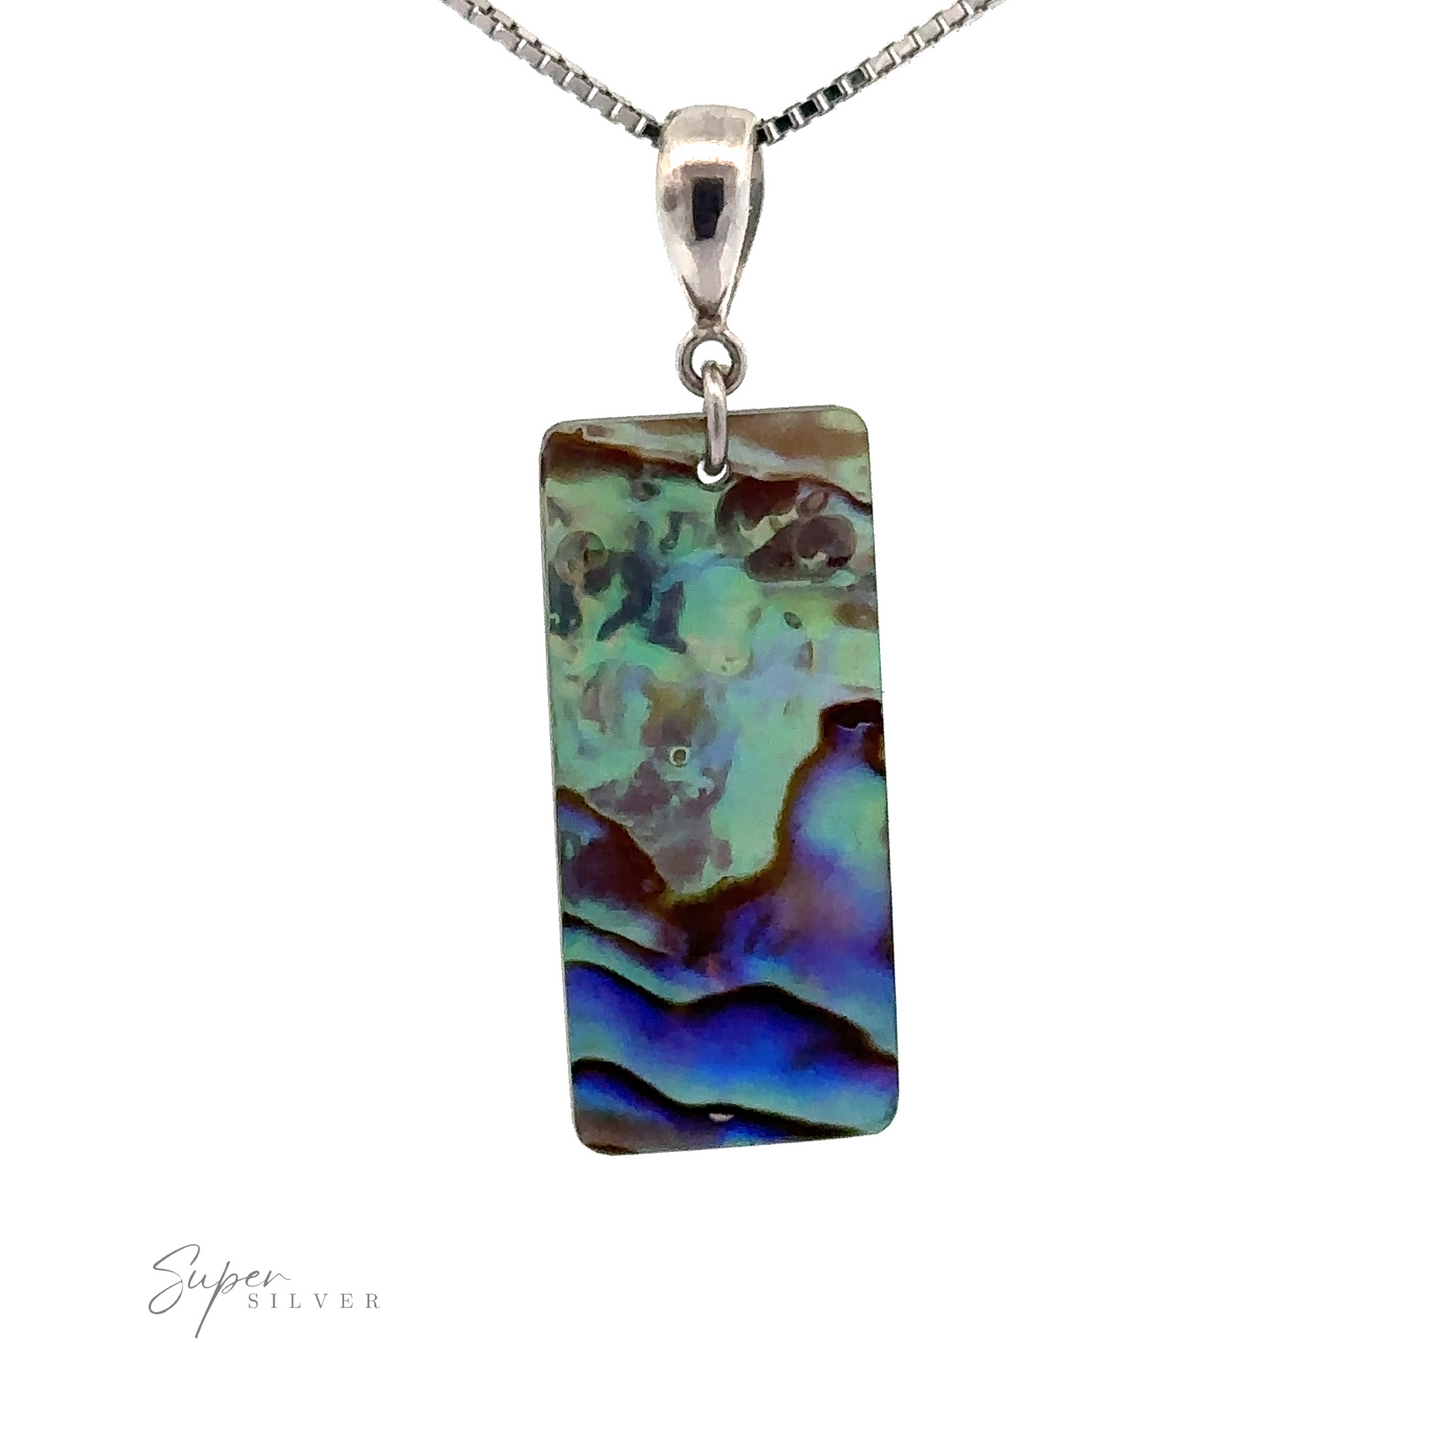 
                  
                    A Rectangular Abalone Slab Pendant with iridescent blue and green hues on a silver chain necklace. This handmade pendant showcases the "Silver Super" logo at the bottom left and is believed to possess healing properties.
                  
                